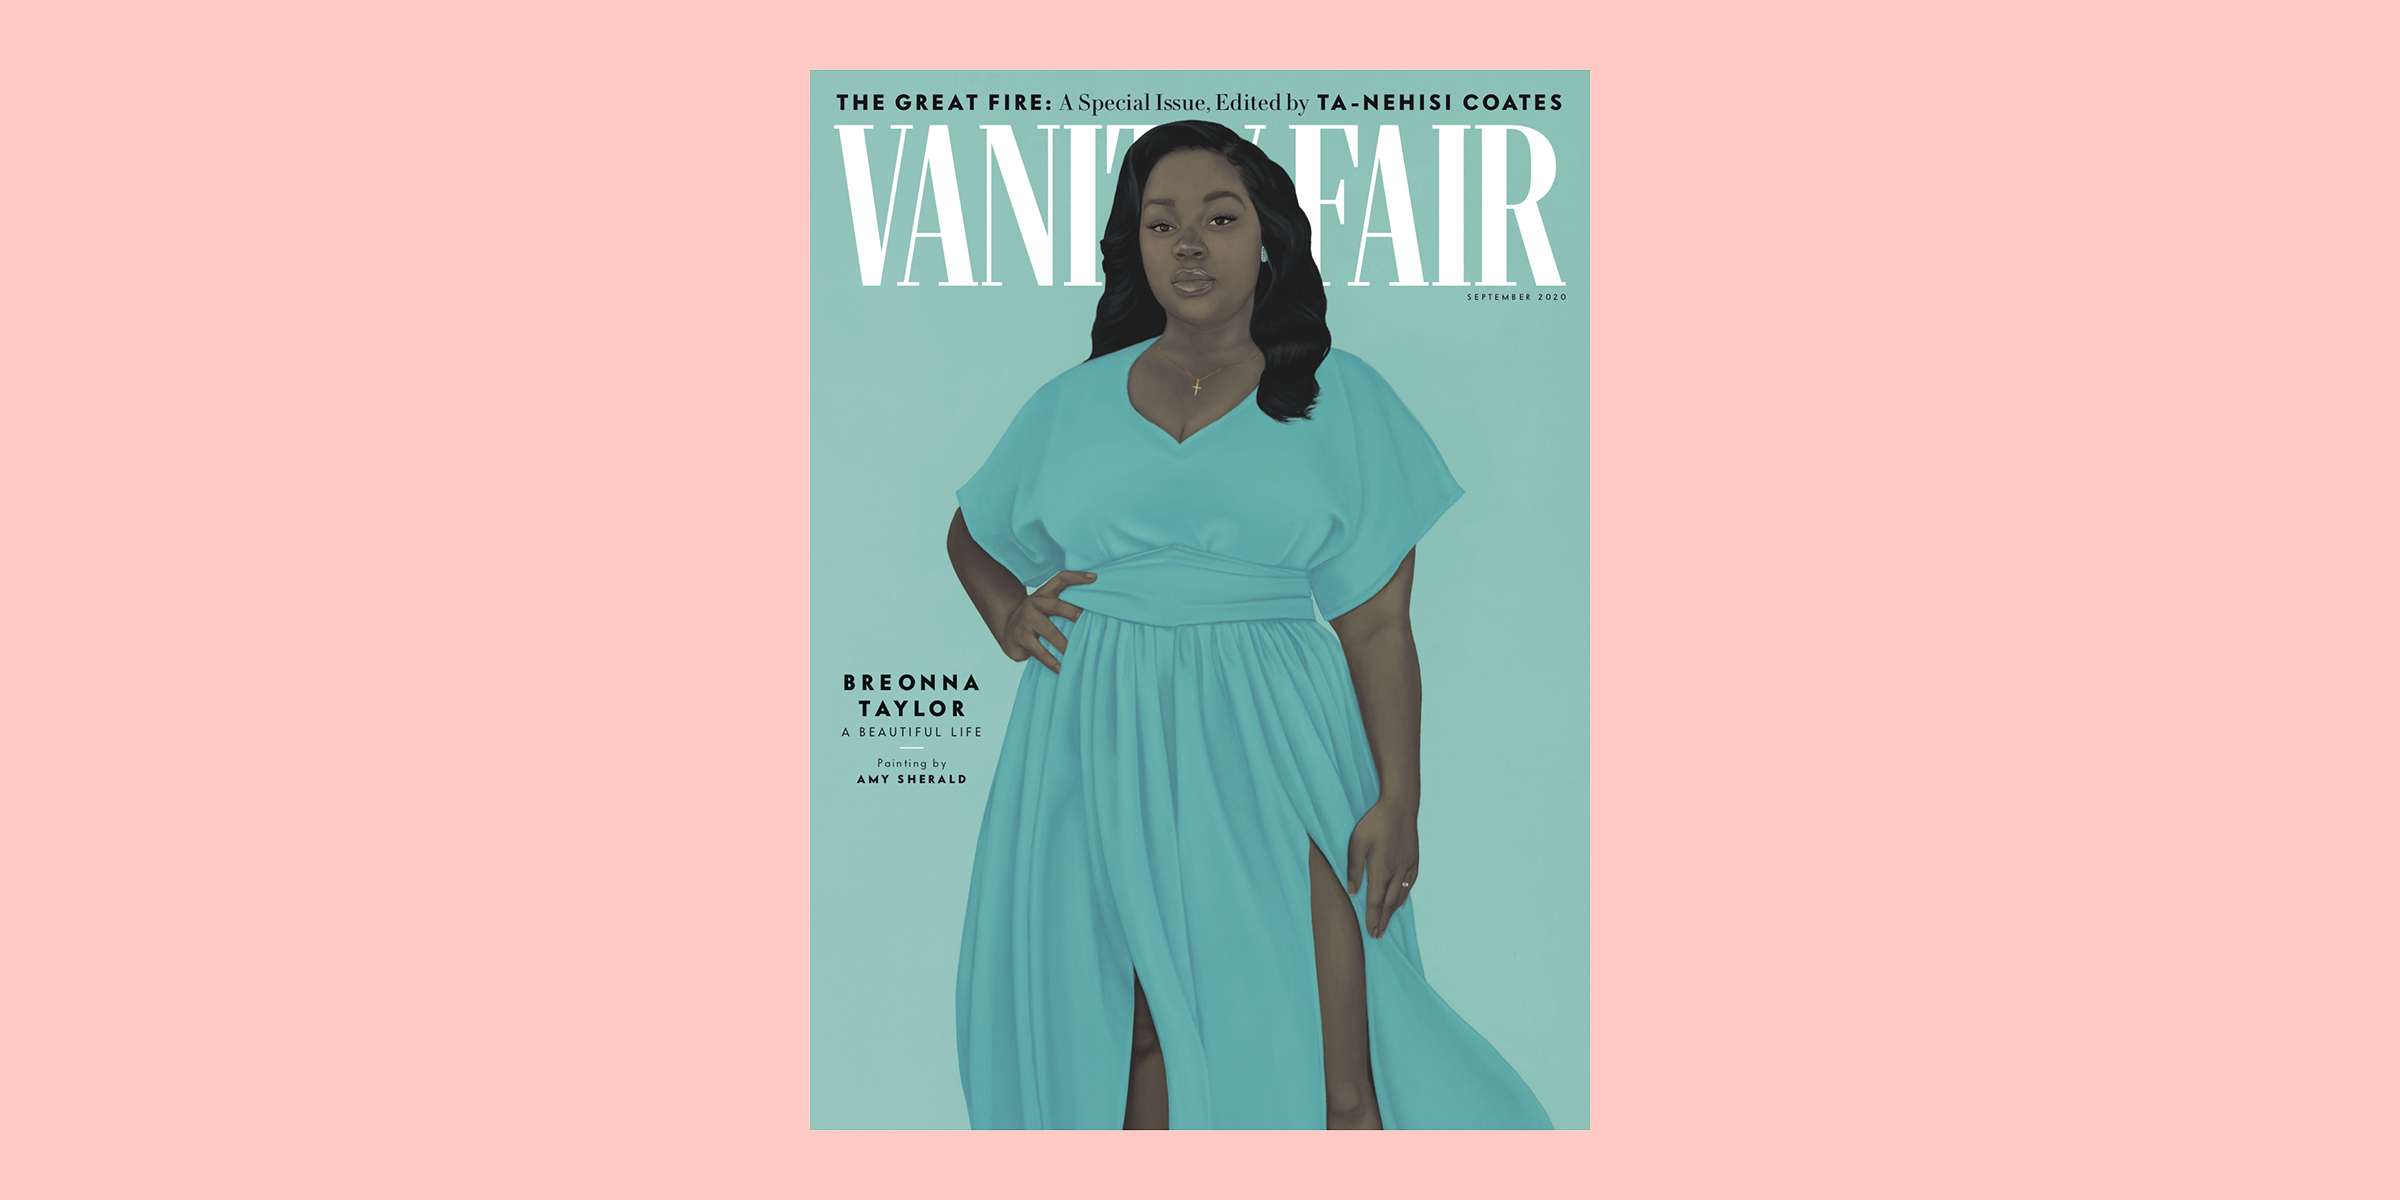 Breonna Taylor featured on Vanity Fair cover